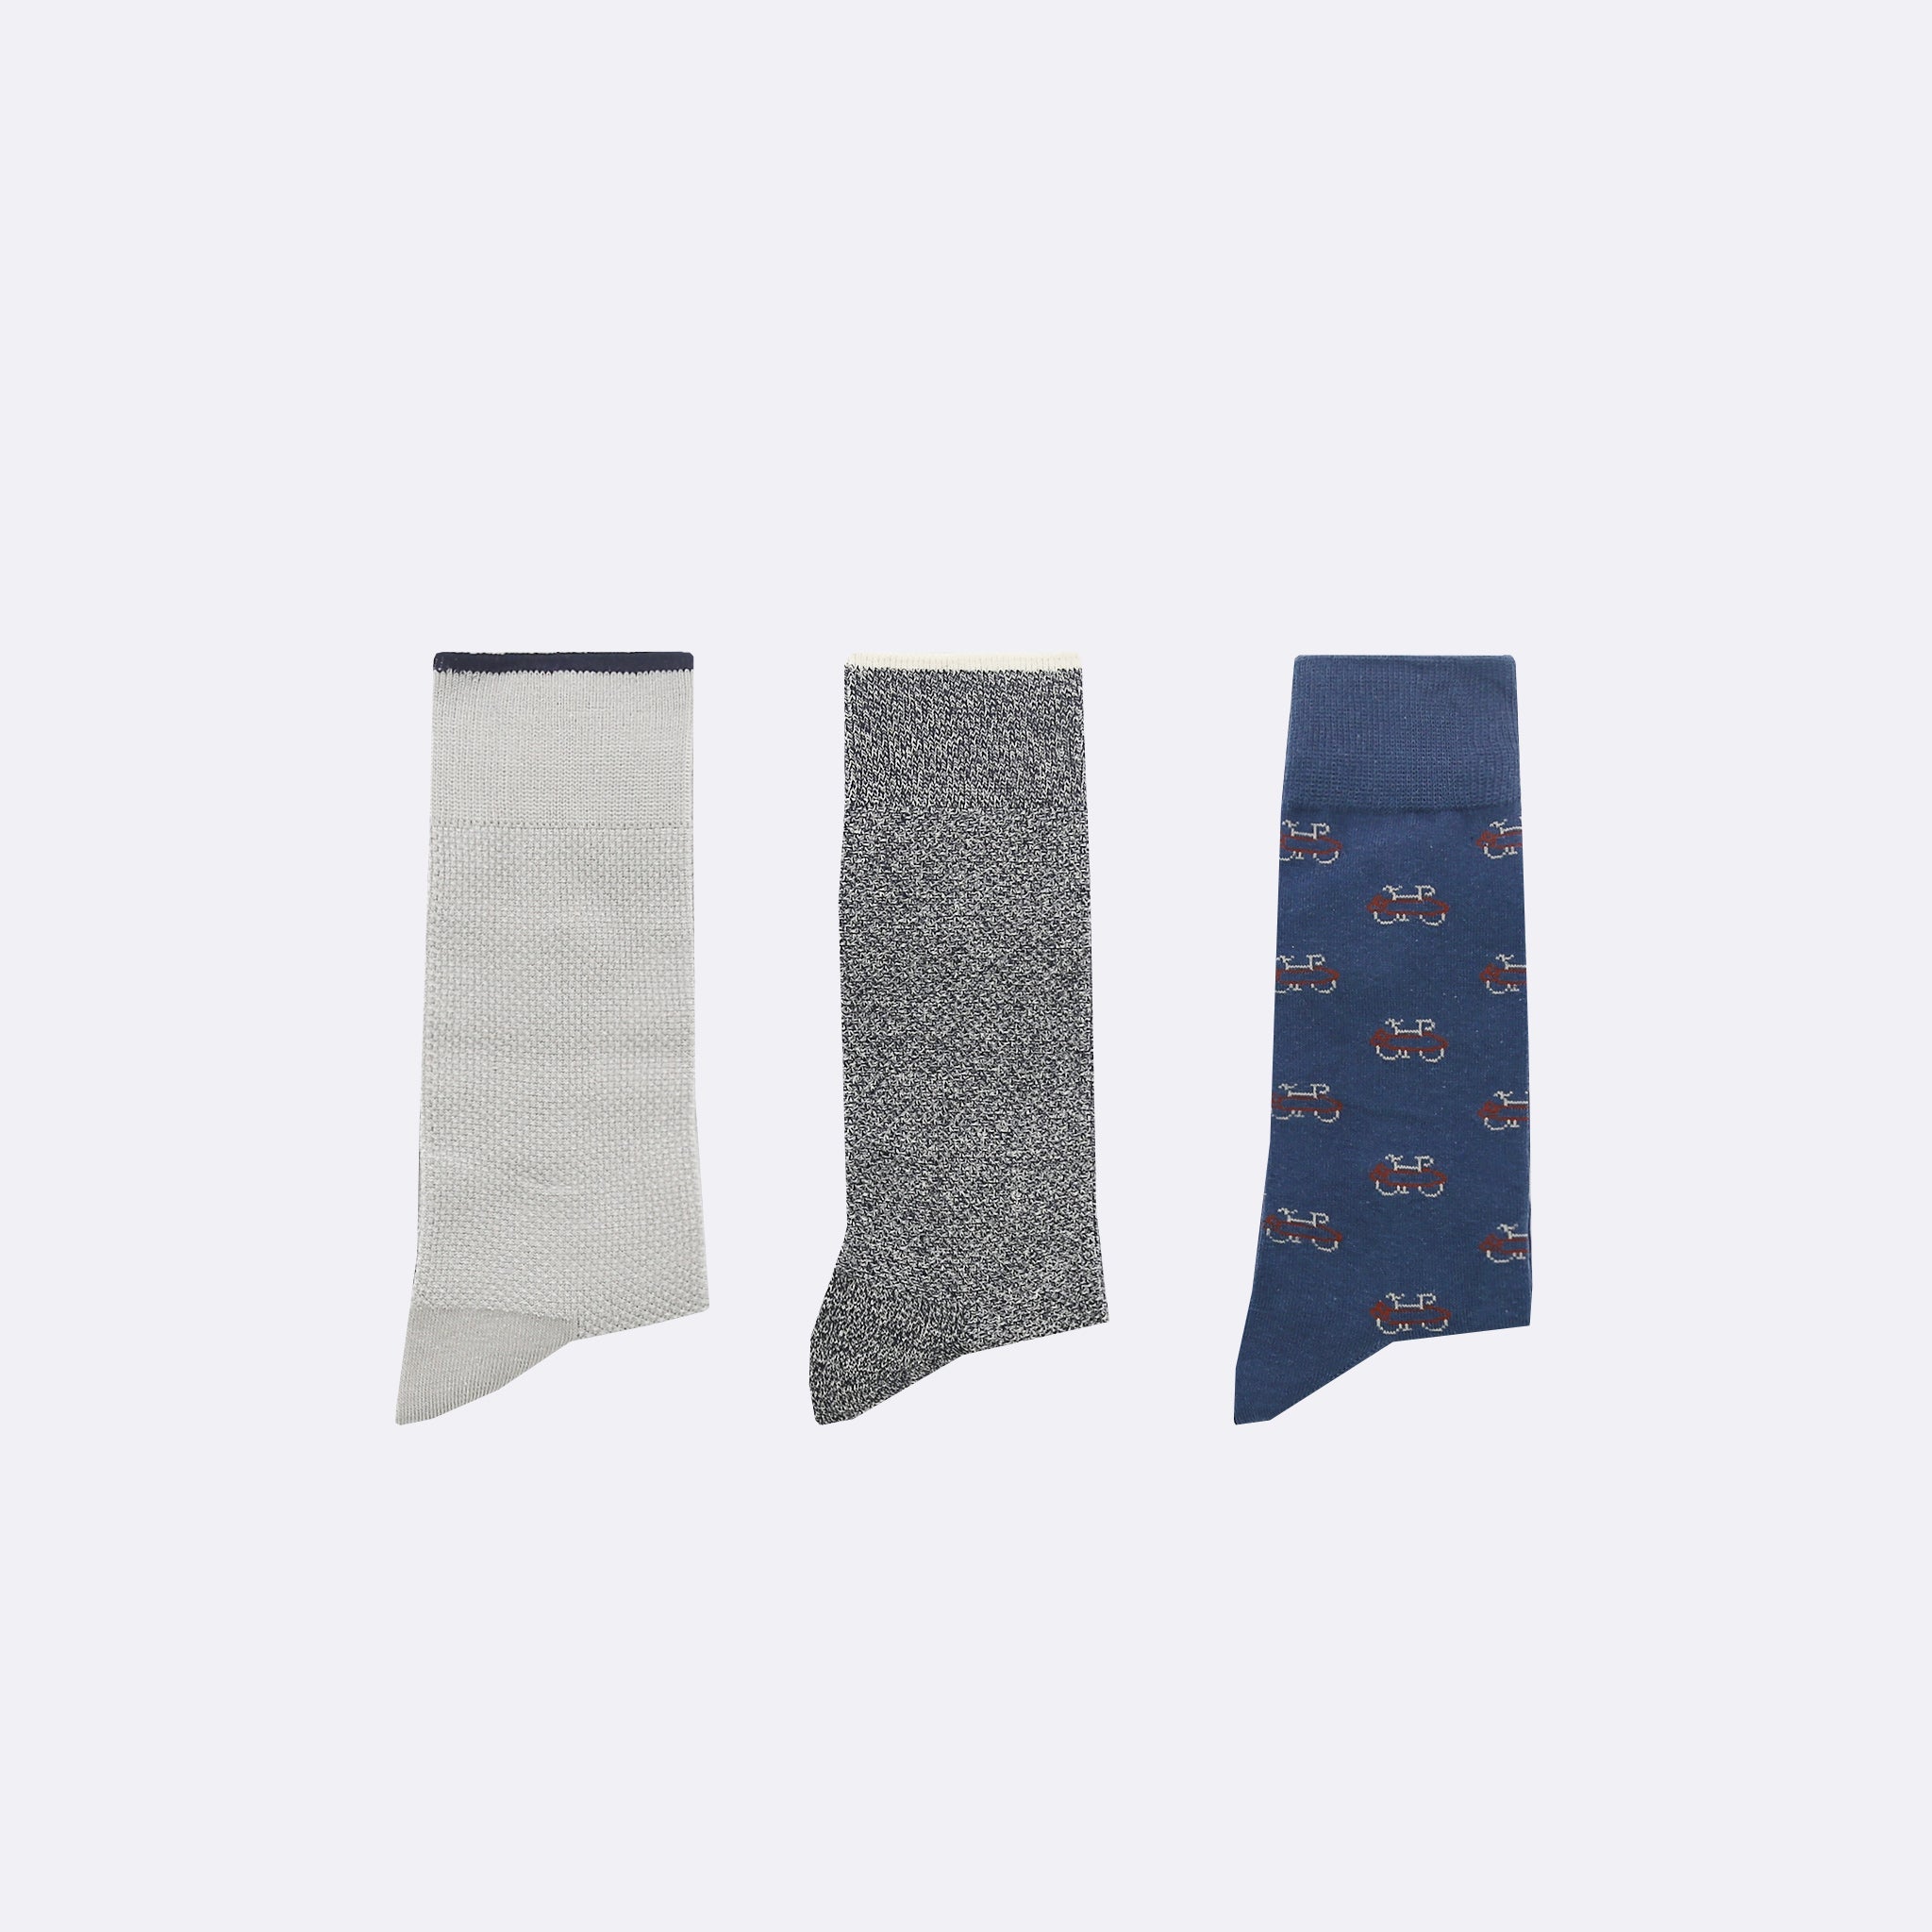 Faguo - Set of 3X Socks - Grey and Blue with Bikes - The Good Chic